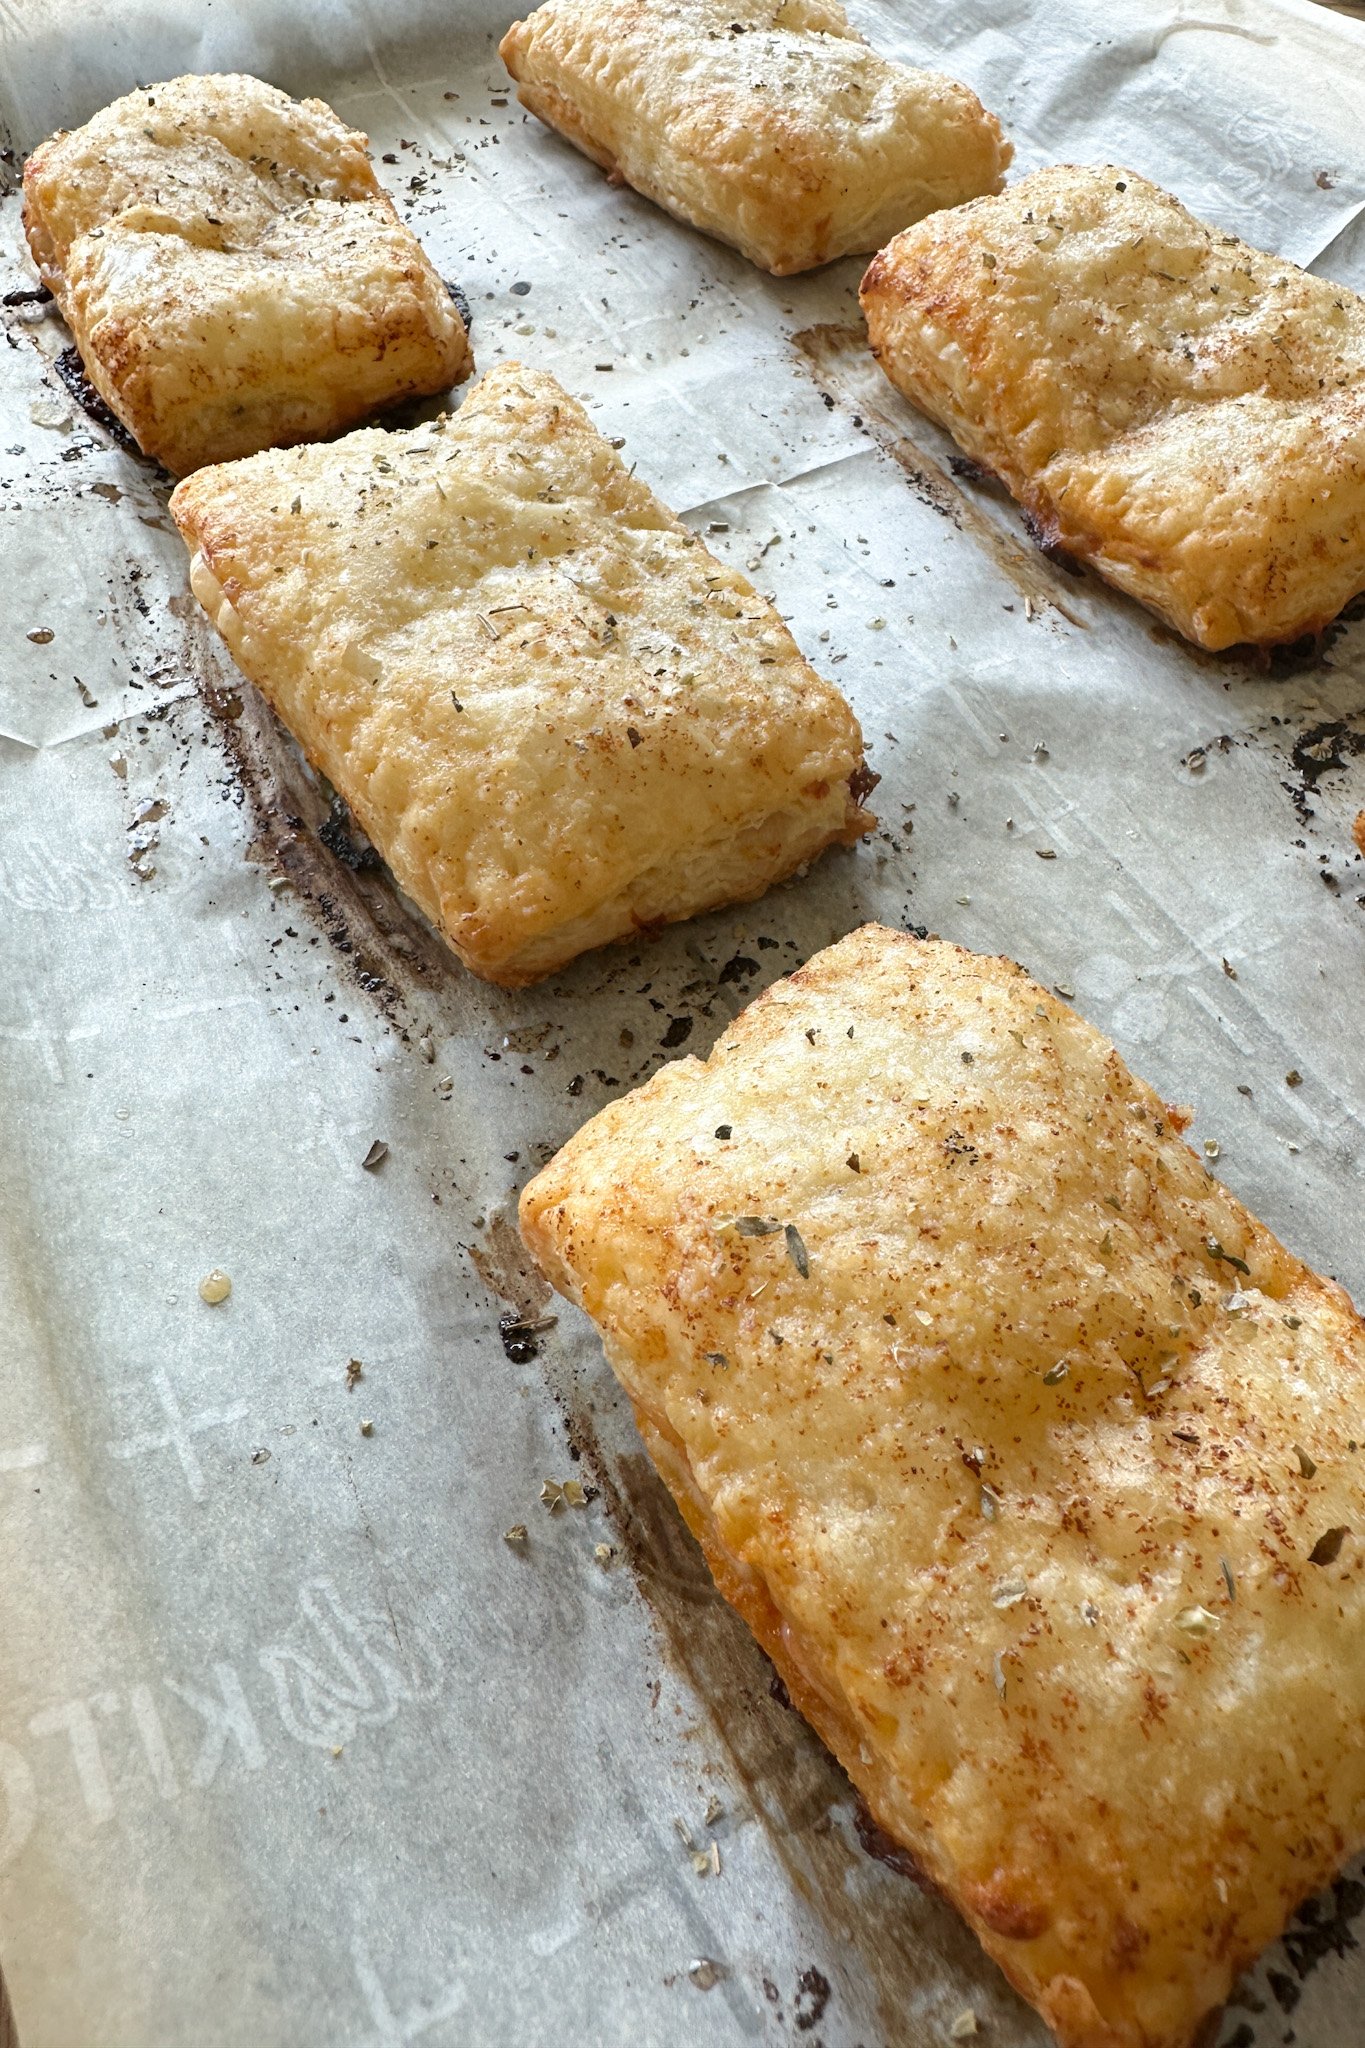 Puff pastry pizza pockets freshly baked.